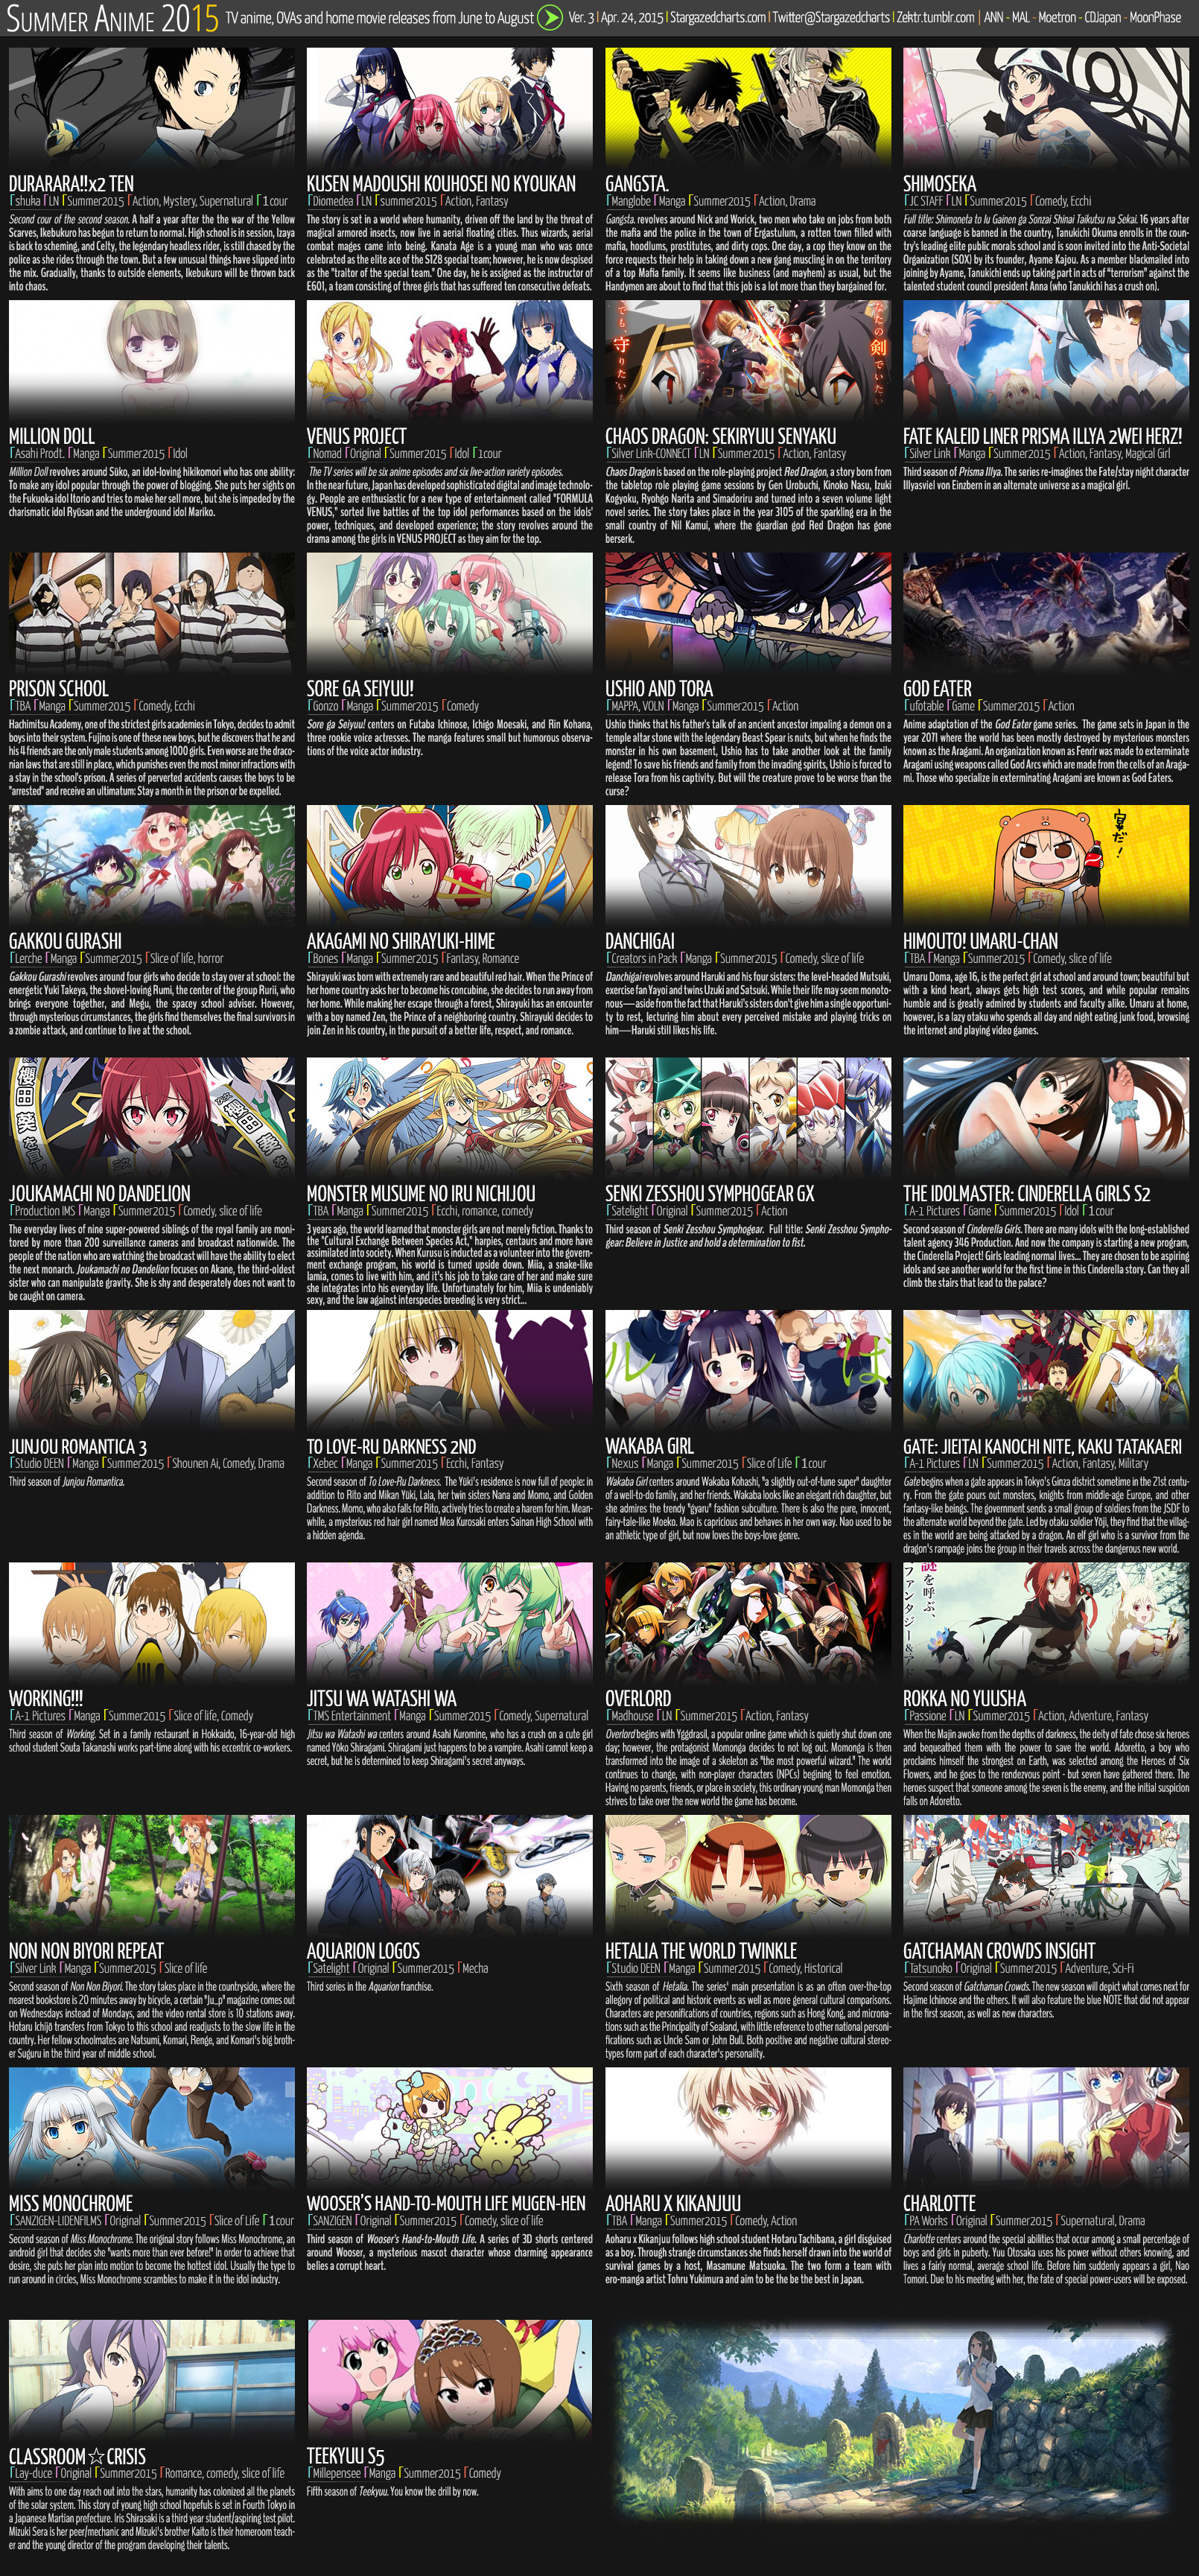 SPRING 2015 - Anime Reviewing Schedule! - YouTube